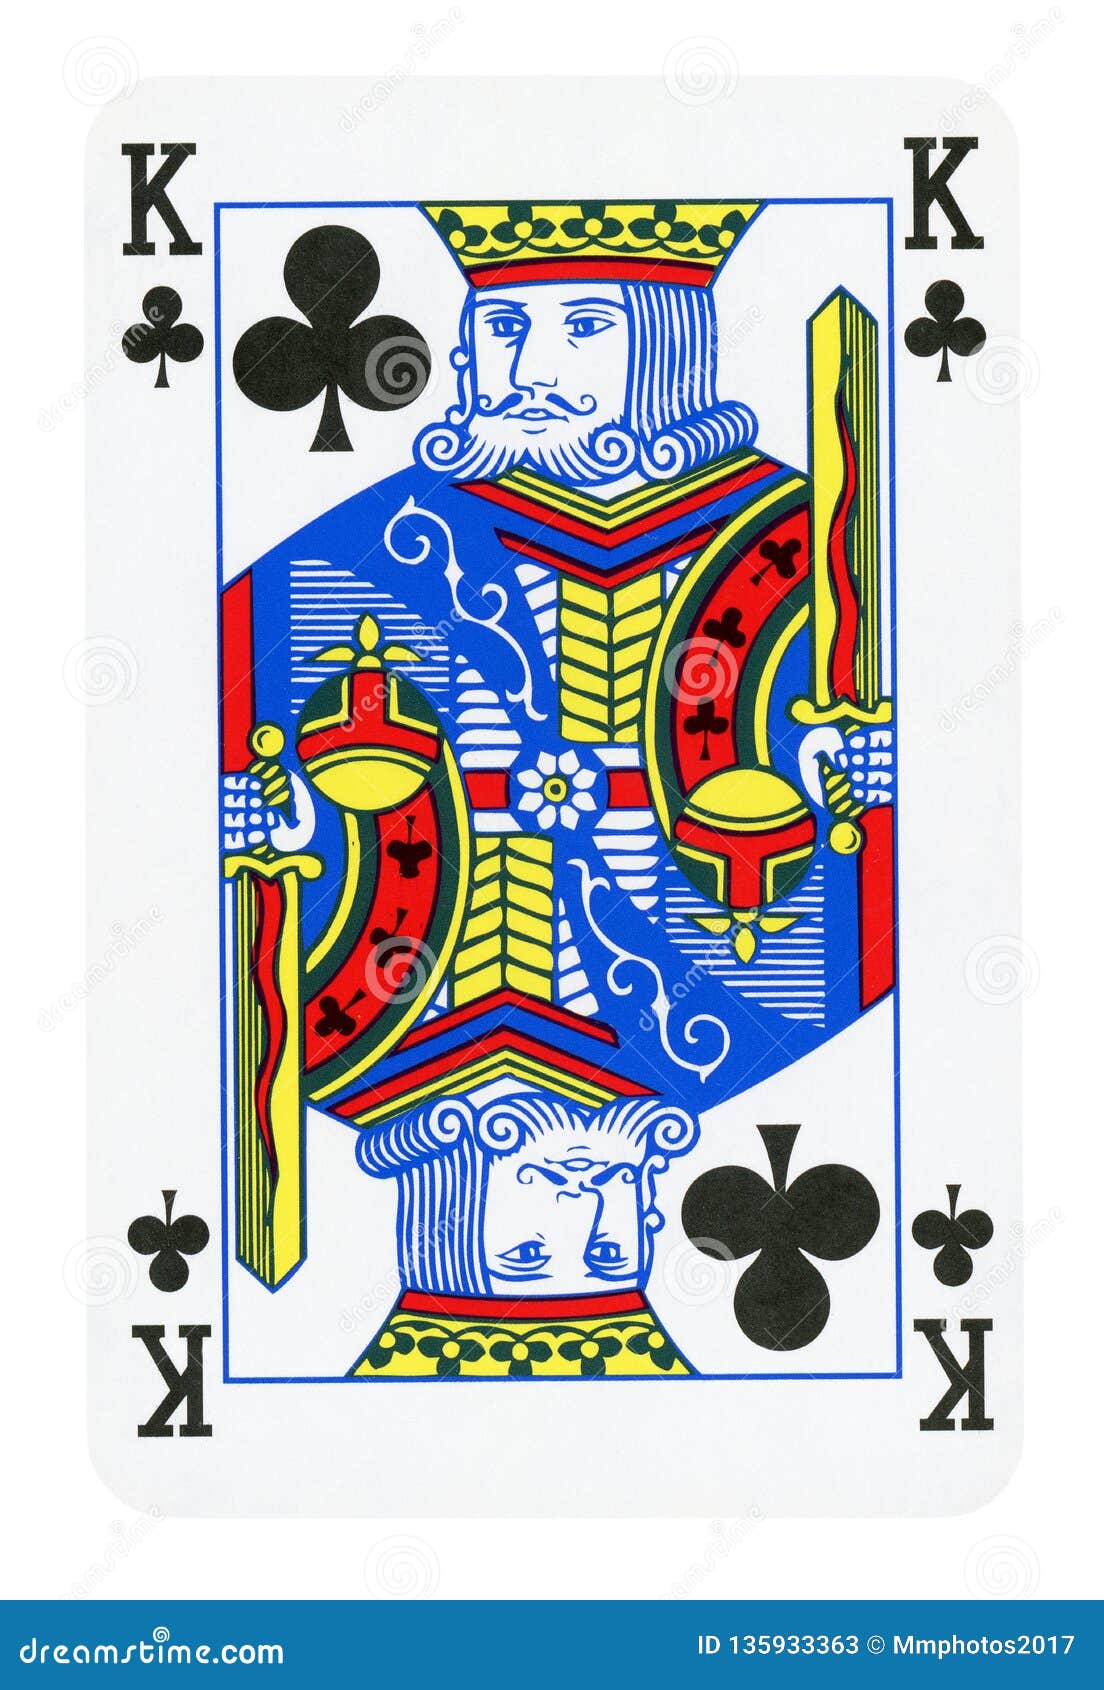 KING OF CLUBS2